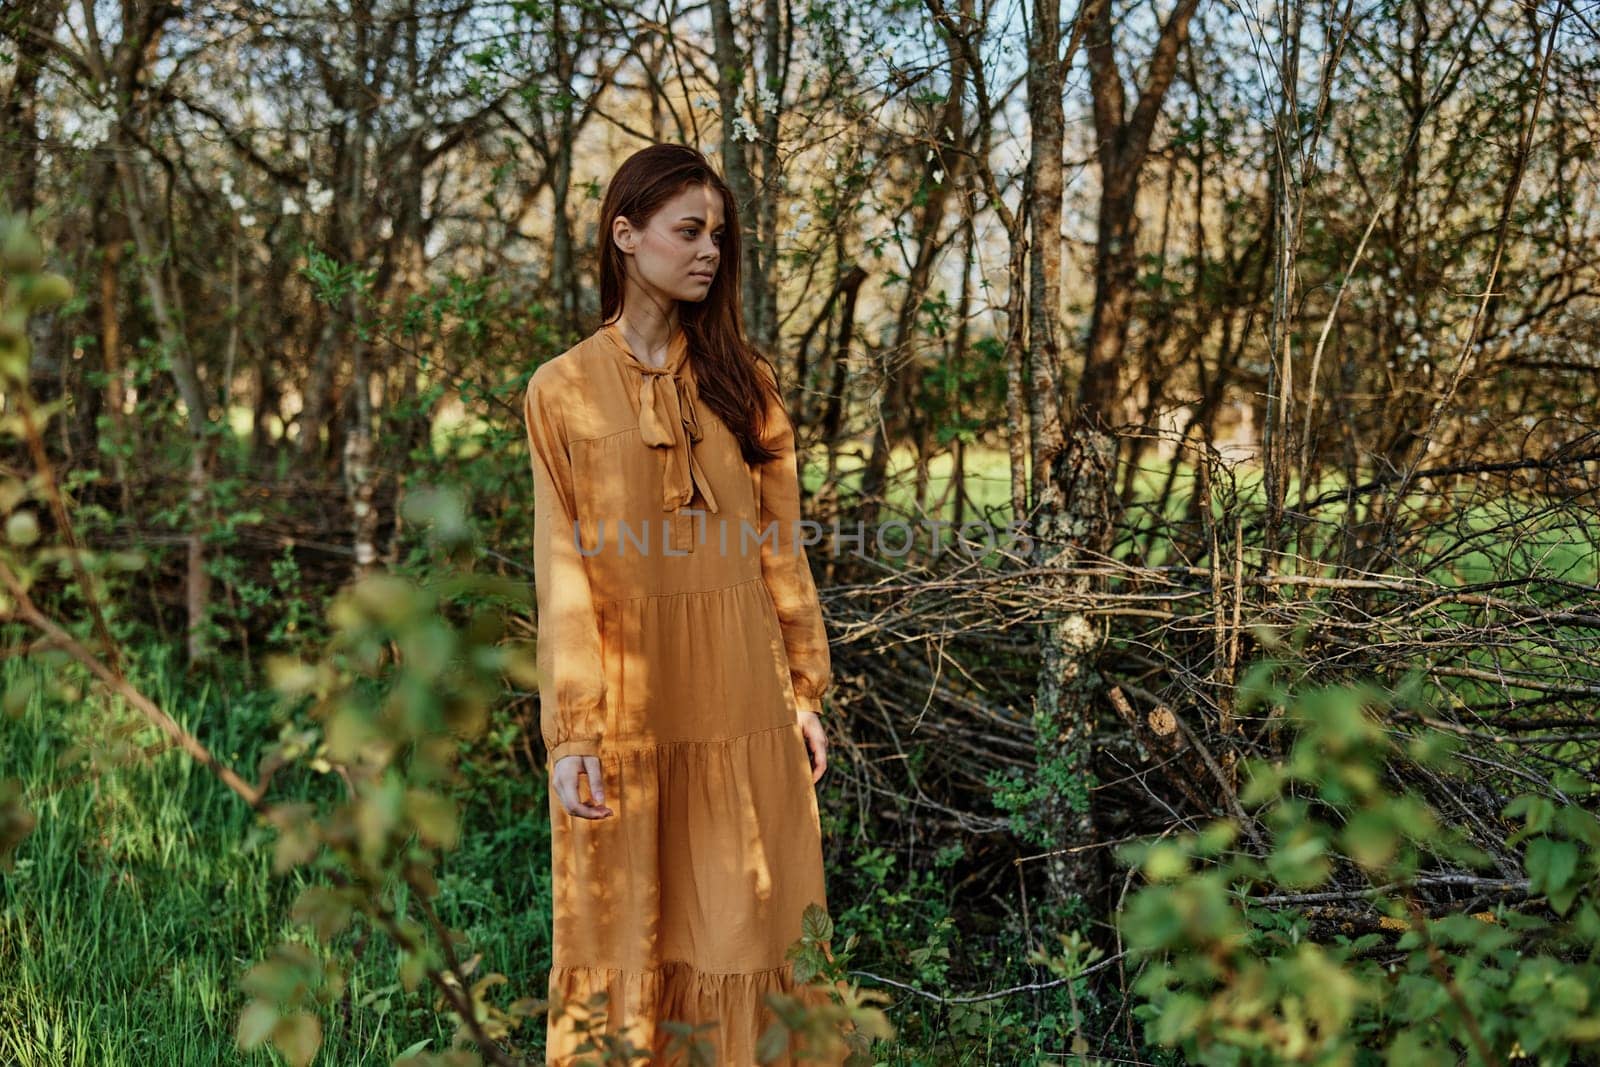 woman with long hair walks in the shade near the trees, dressed in a long orange dress, enjoying the weather and the weekend. The theme of privacy with nature, horizontal photography on the street by Vichizh